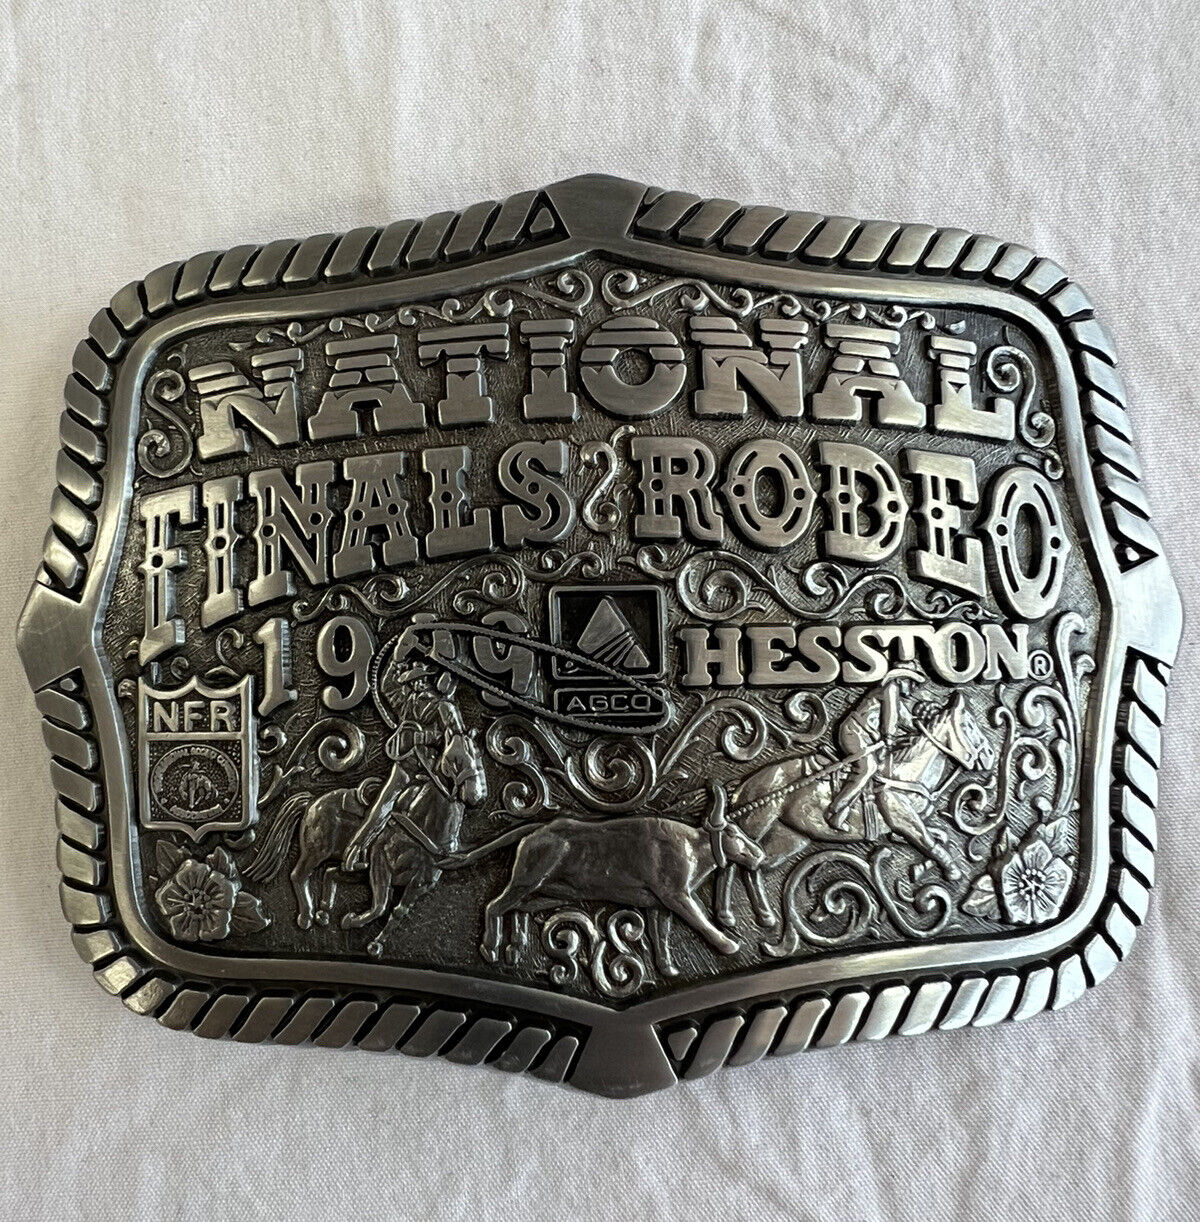 VTG Hesston National Finals Rodeo Rare 1999 NFR Belt Buckle AGCO Series Limited